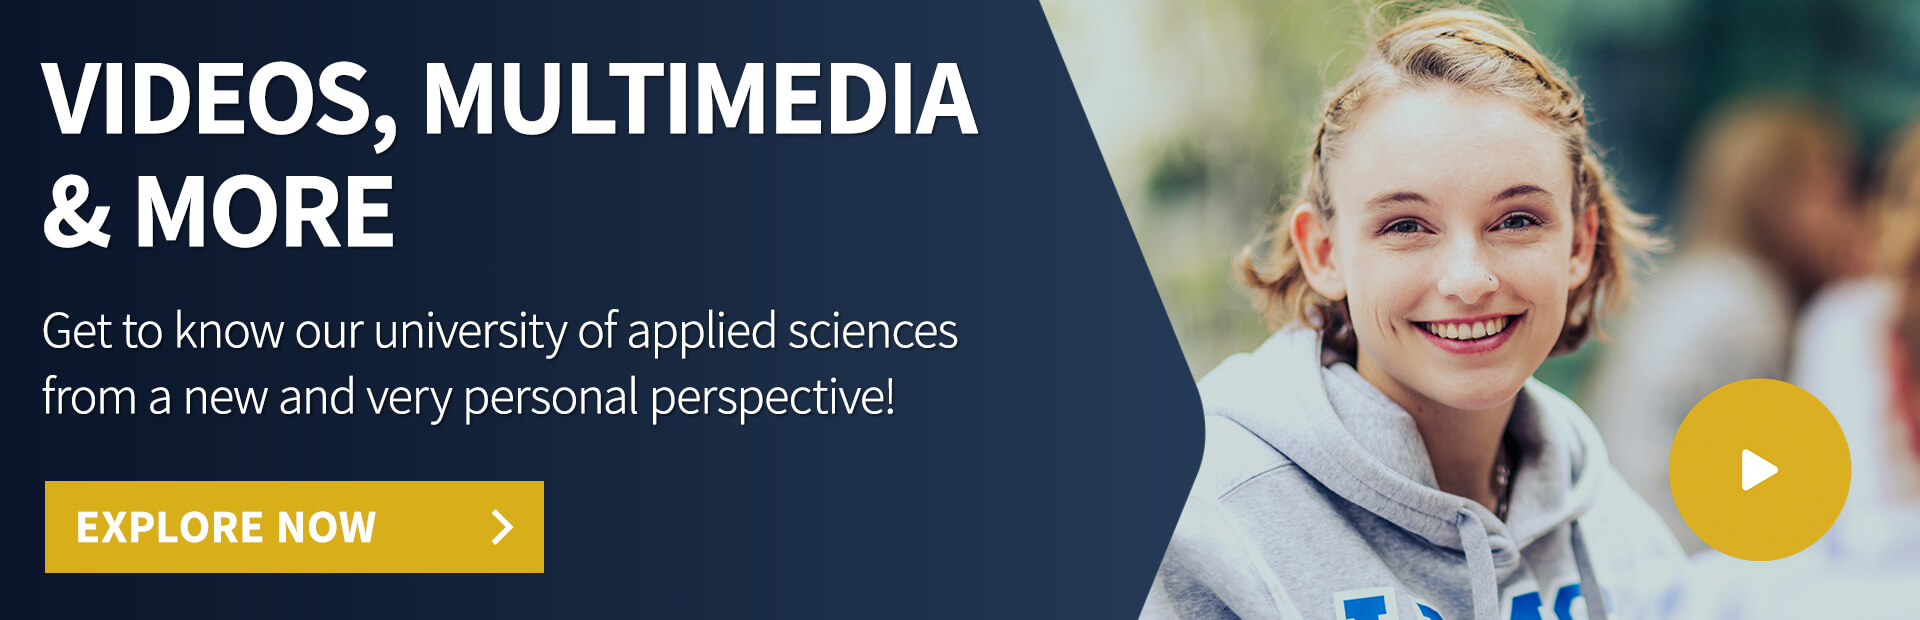 Virtual IMC platform - Videos, multimedia and more: Get to know our university of applied sciences from a new and very personal perspective!